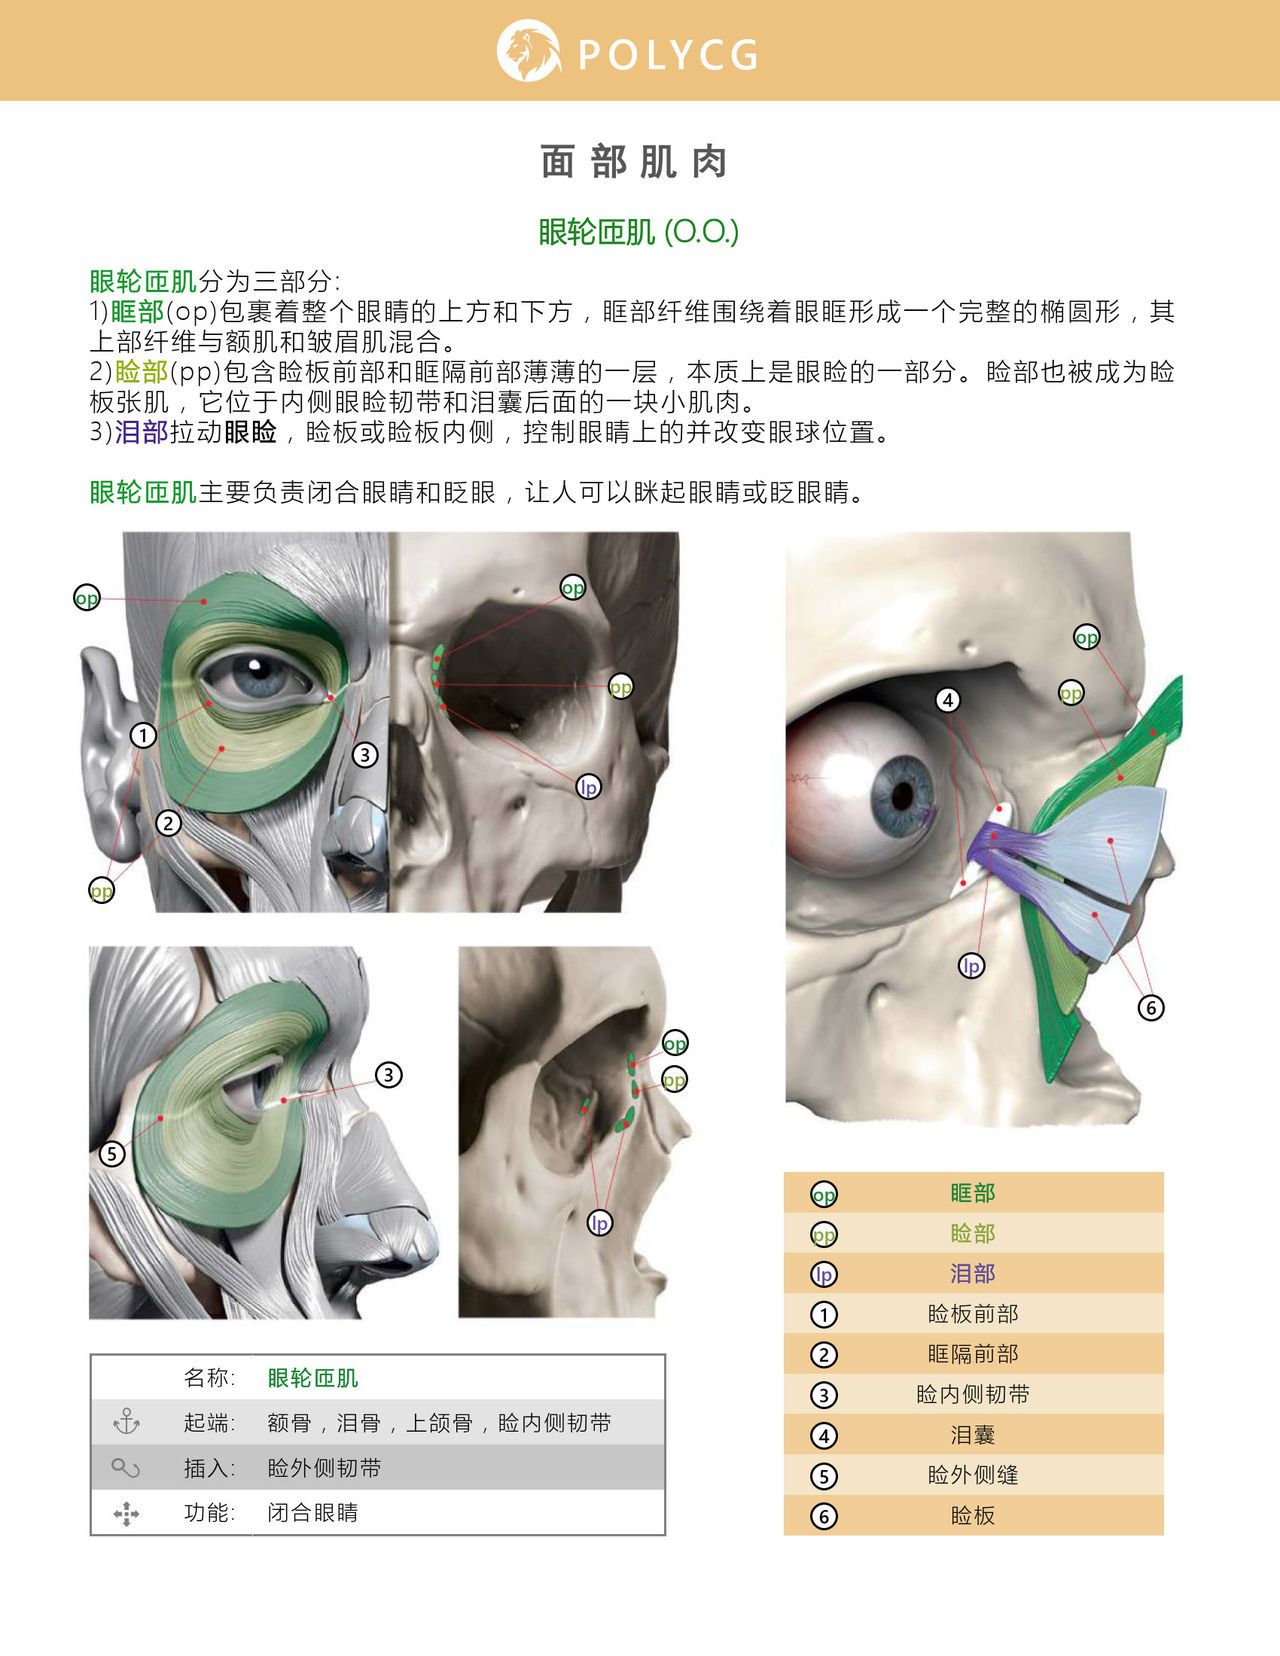 Uldis Zarins-Anatomy of Facial Expression-Exonicus [Chinese] 面部表情艺用解剖 [中文版] 60